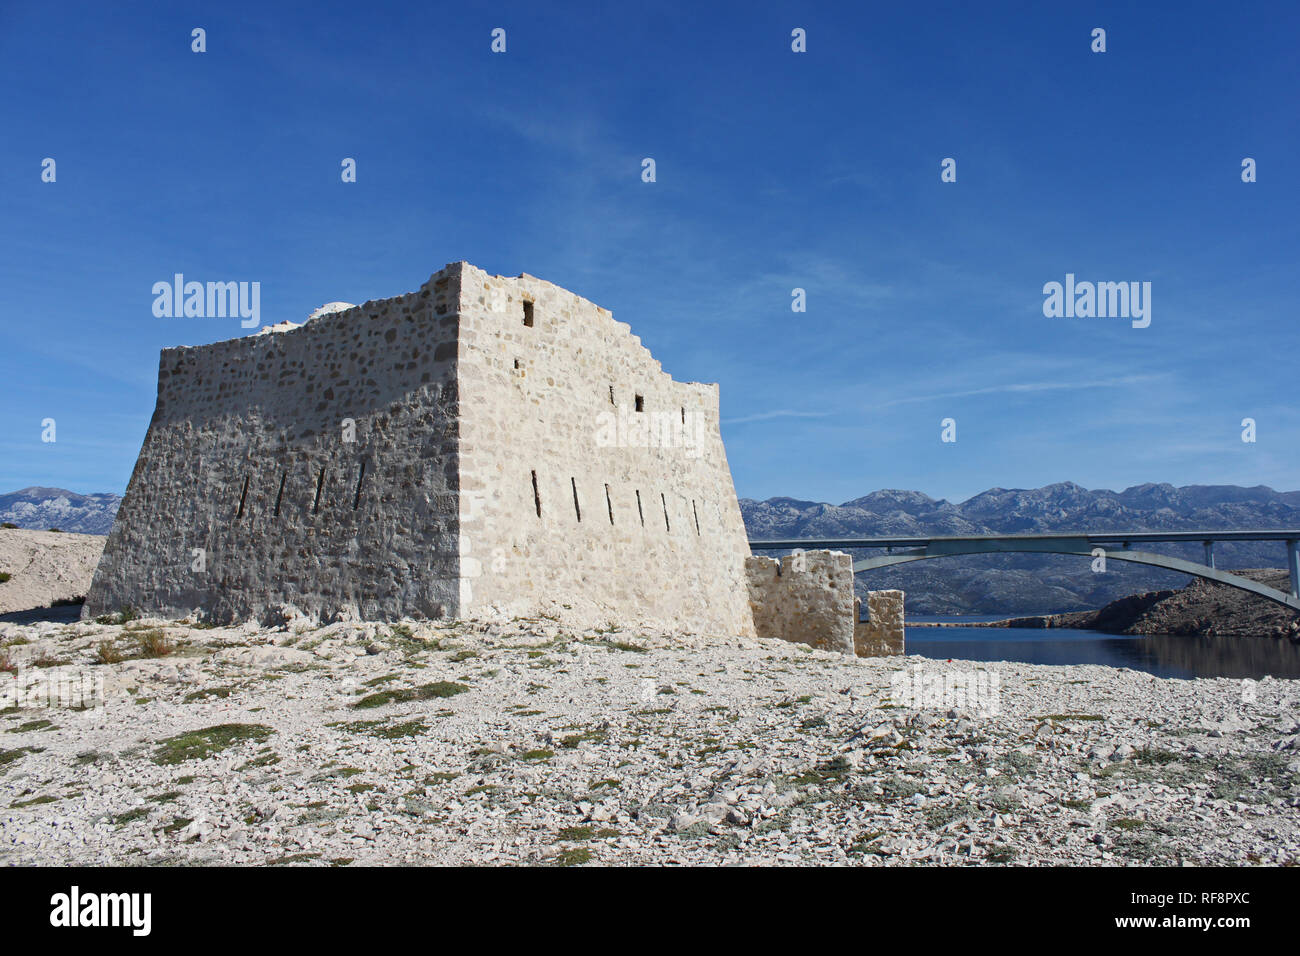 Ruins of the old fortress fortica on the island of Pag (Croatia). The bridge connecting the island with the land in the background. Stock Photo